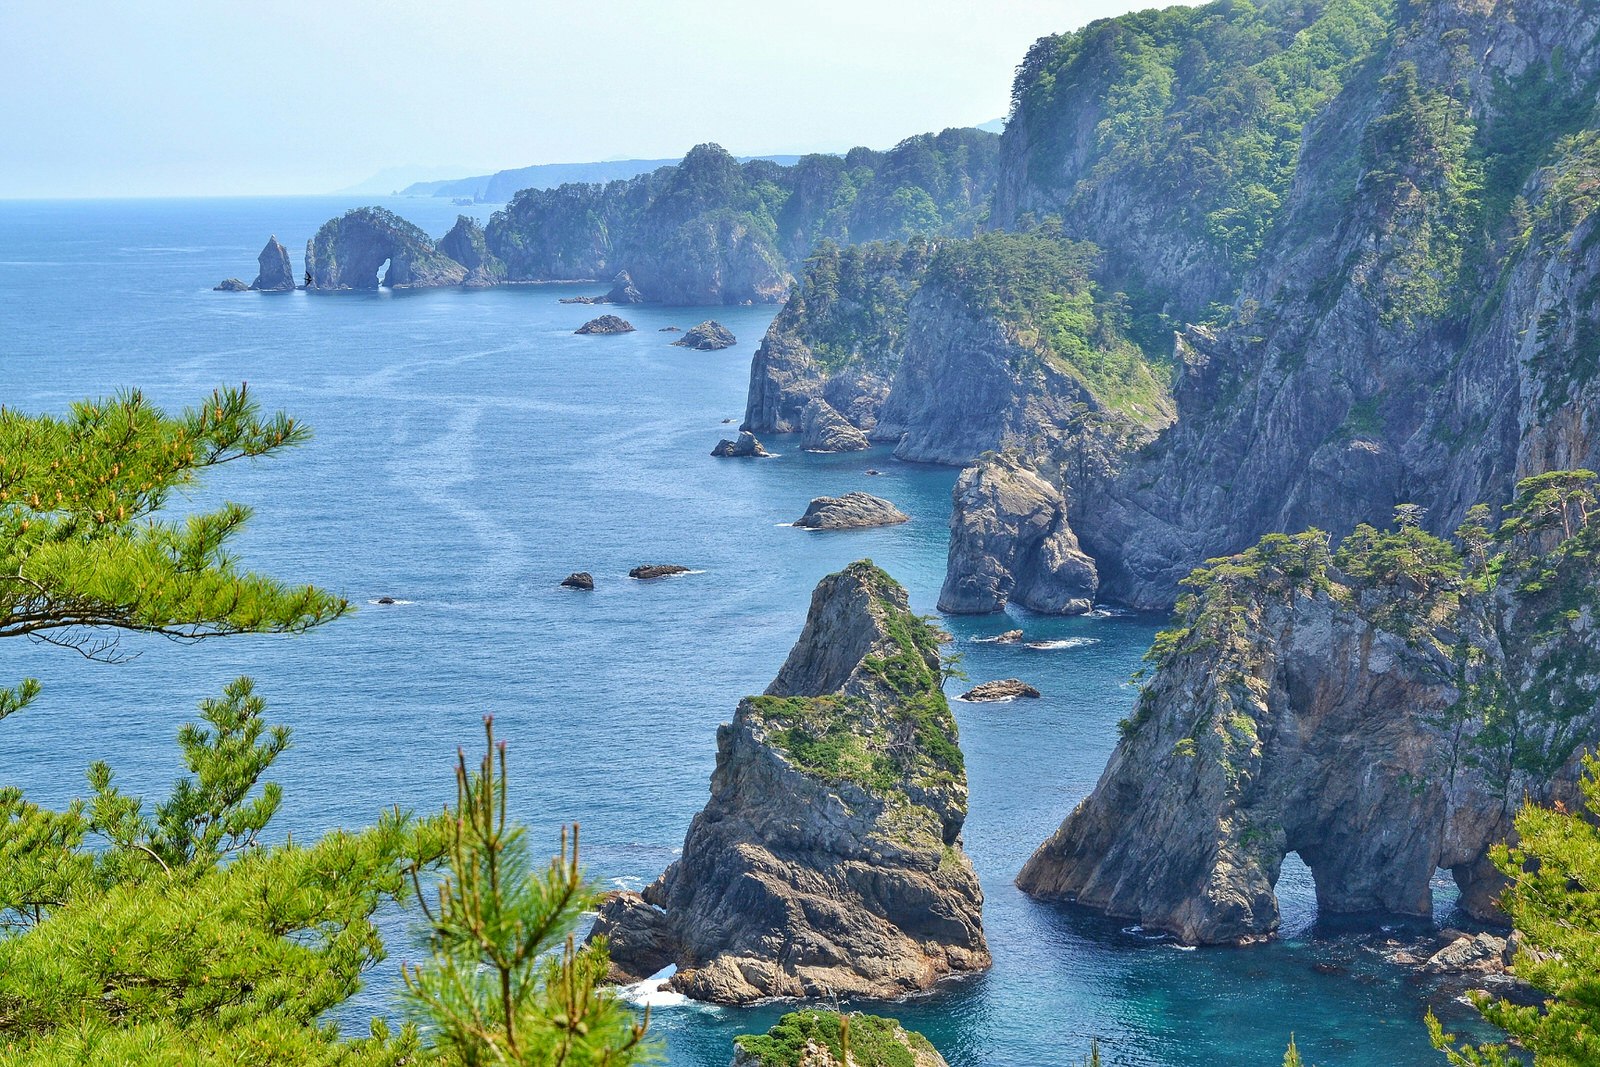 View of the rocky coastline of the Kitayamazaki Cliffs in Iwate on a clear and sunny day. The sheer, rocky cliffs are topped with bright green grass and surrounded by restless sea.